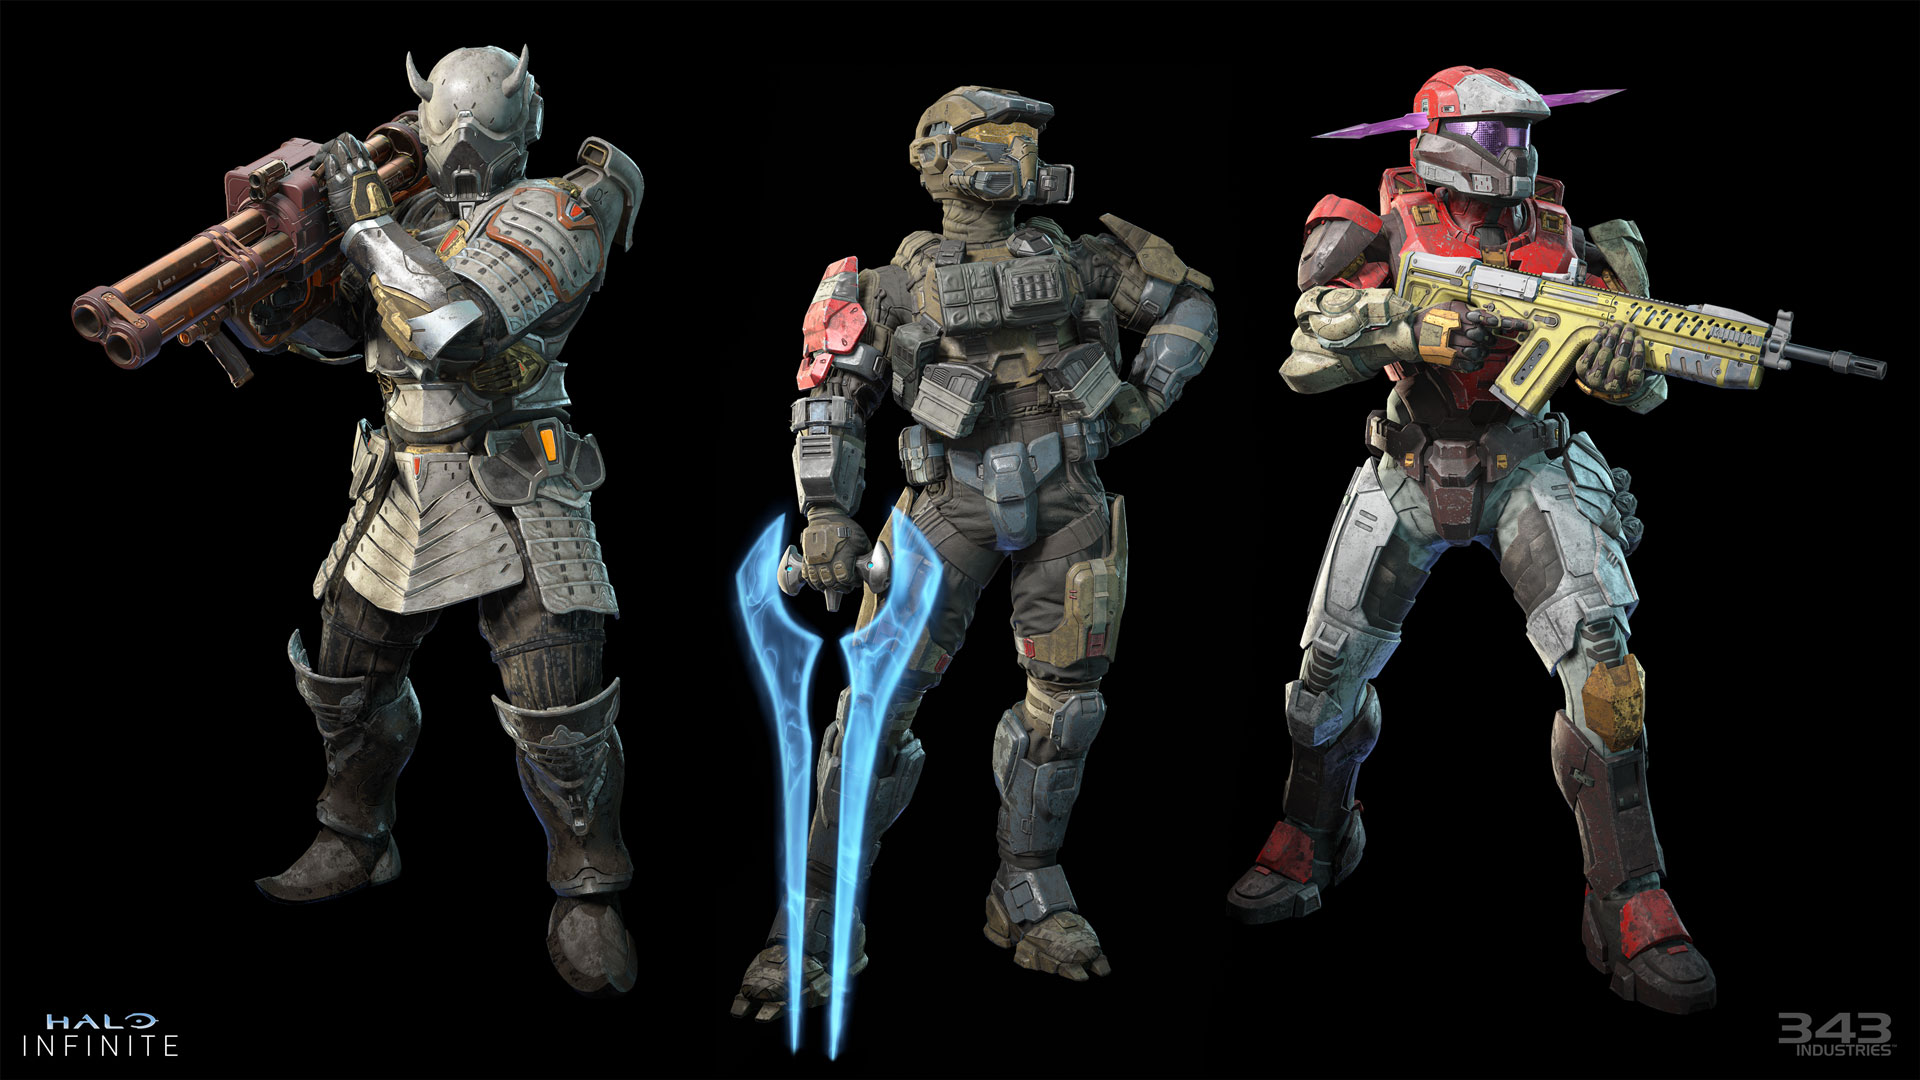 Halo Infinite image of three Spartans clad in customization content from upcoming Operations